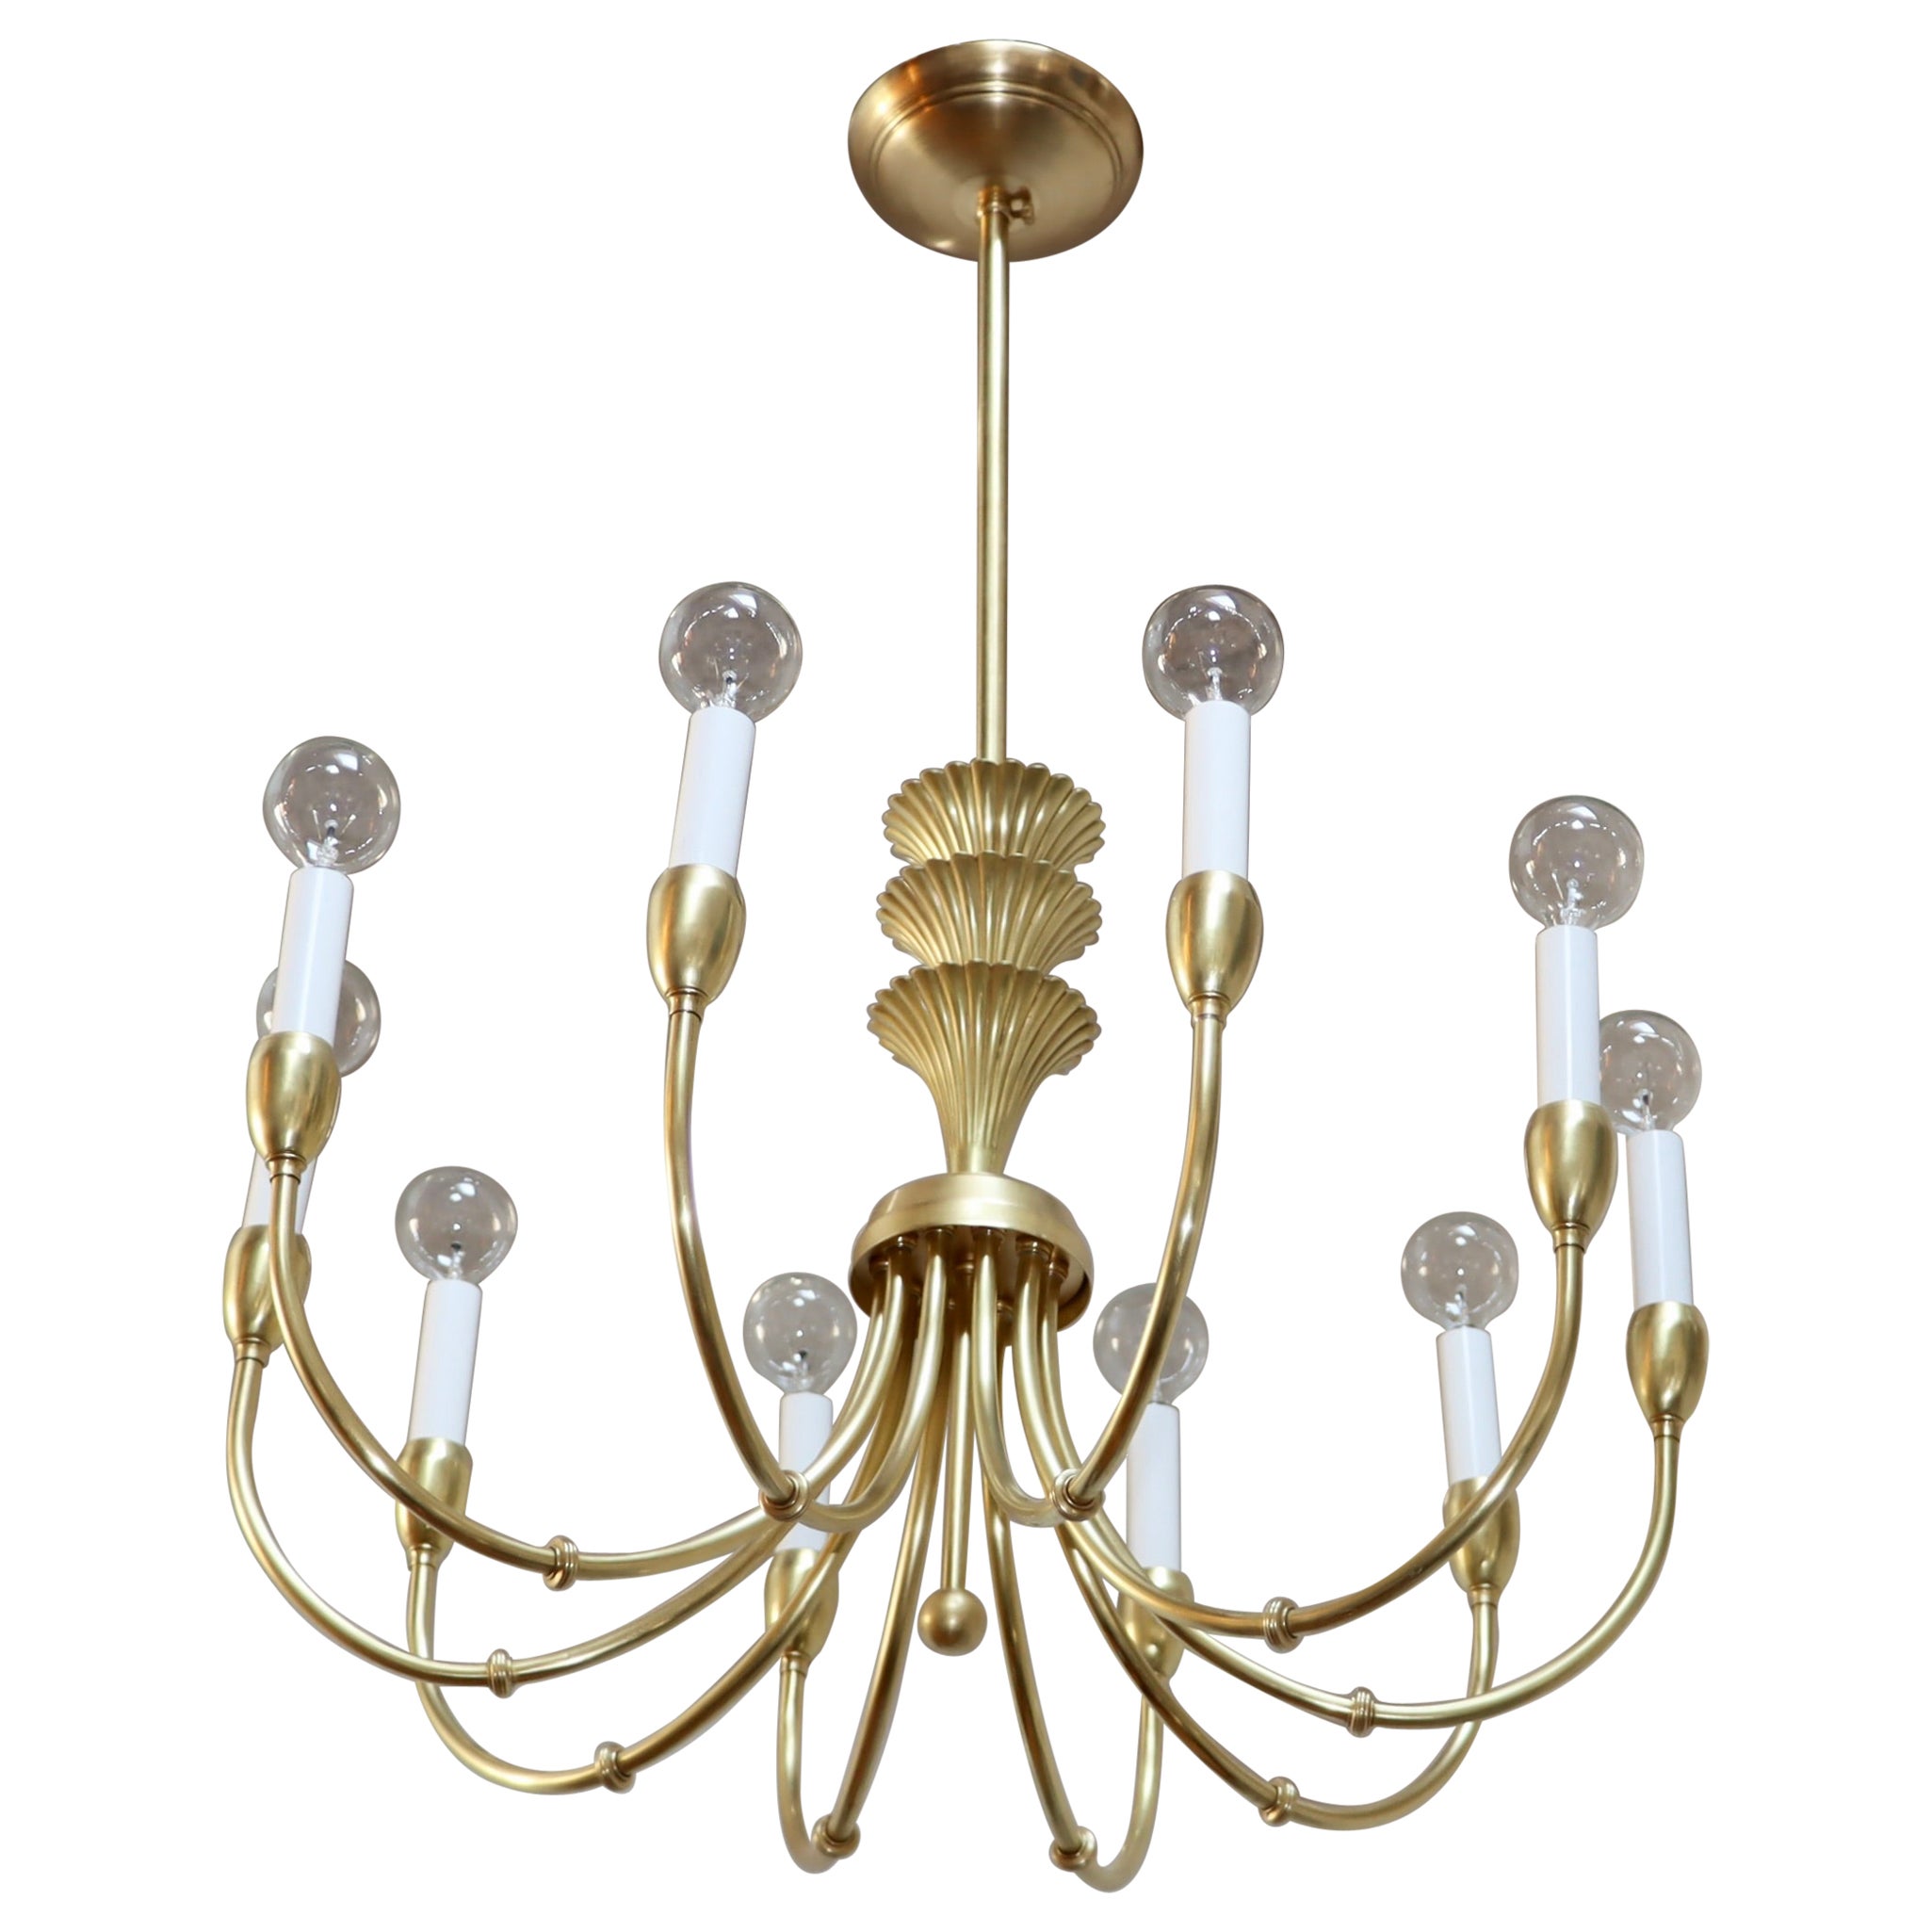 1950s Italian Brass 10 Arm Chandelier in the Style of Gio Ponti For Sale